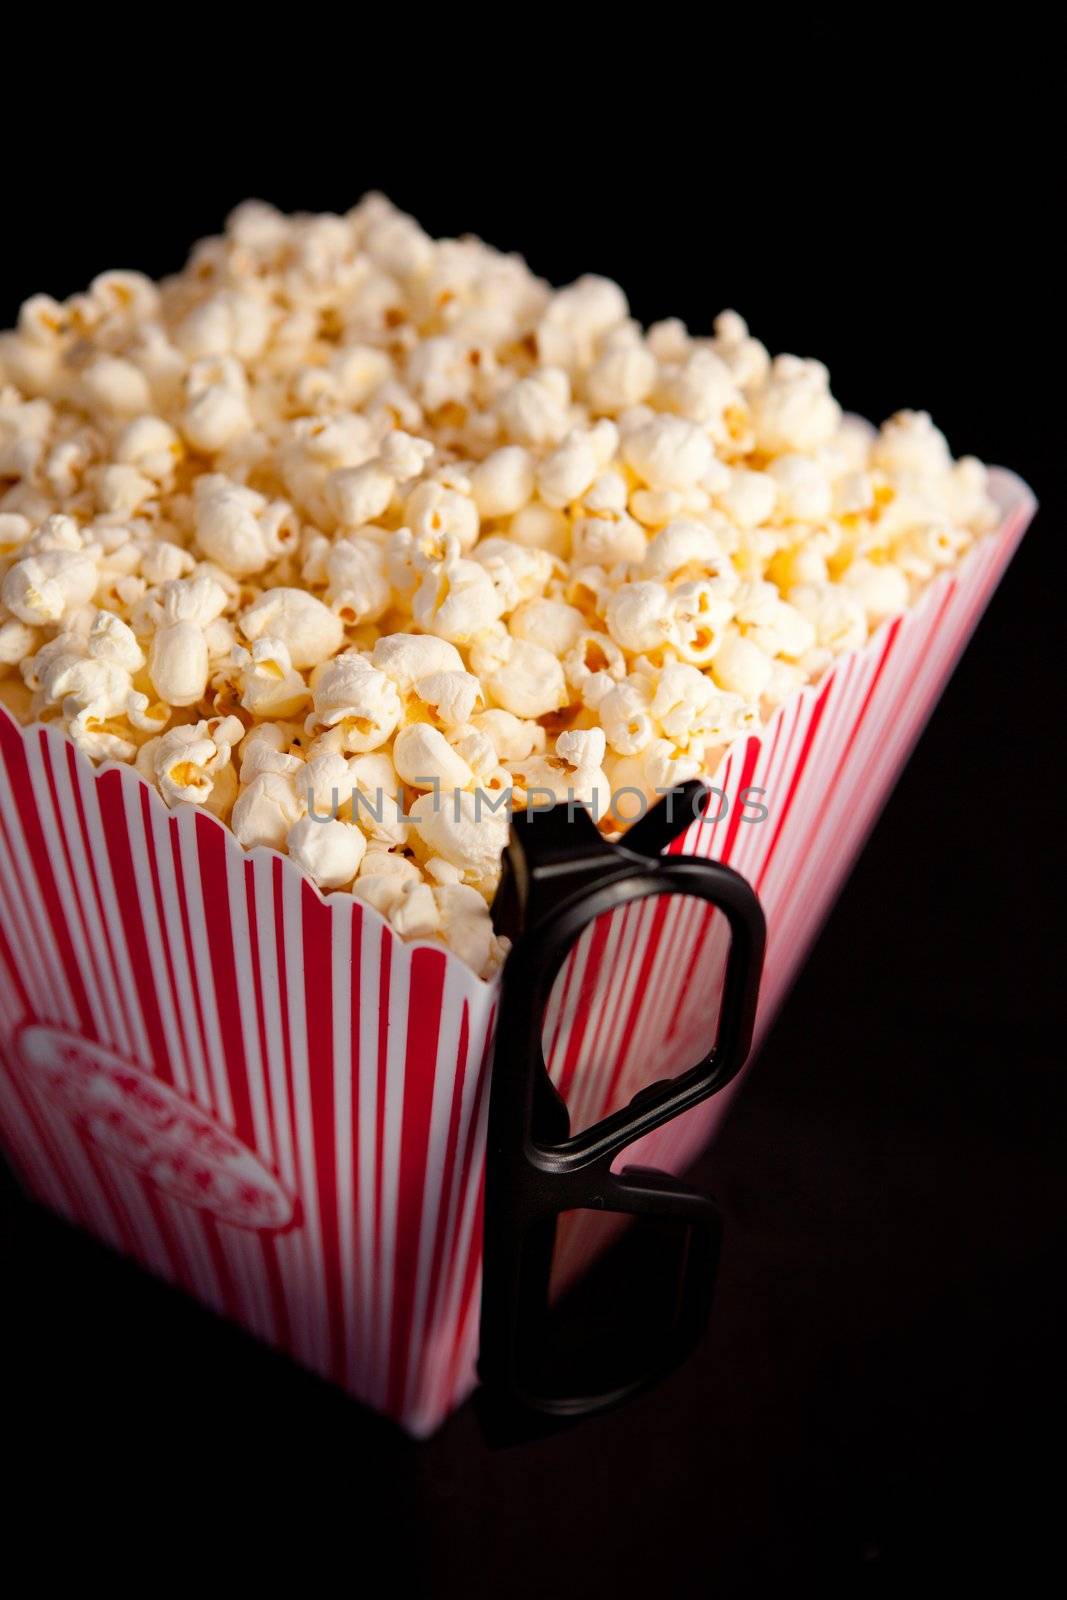 3D glasses hanging on the corner of a box of popcorn against a black background